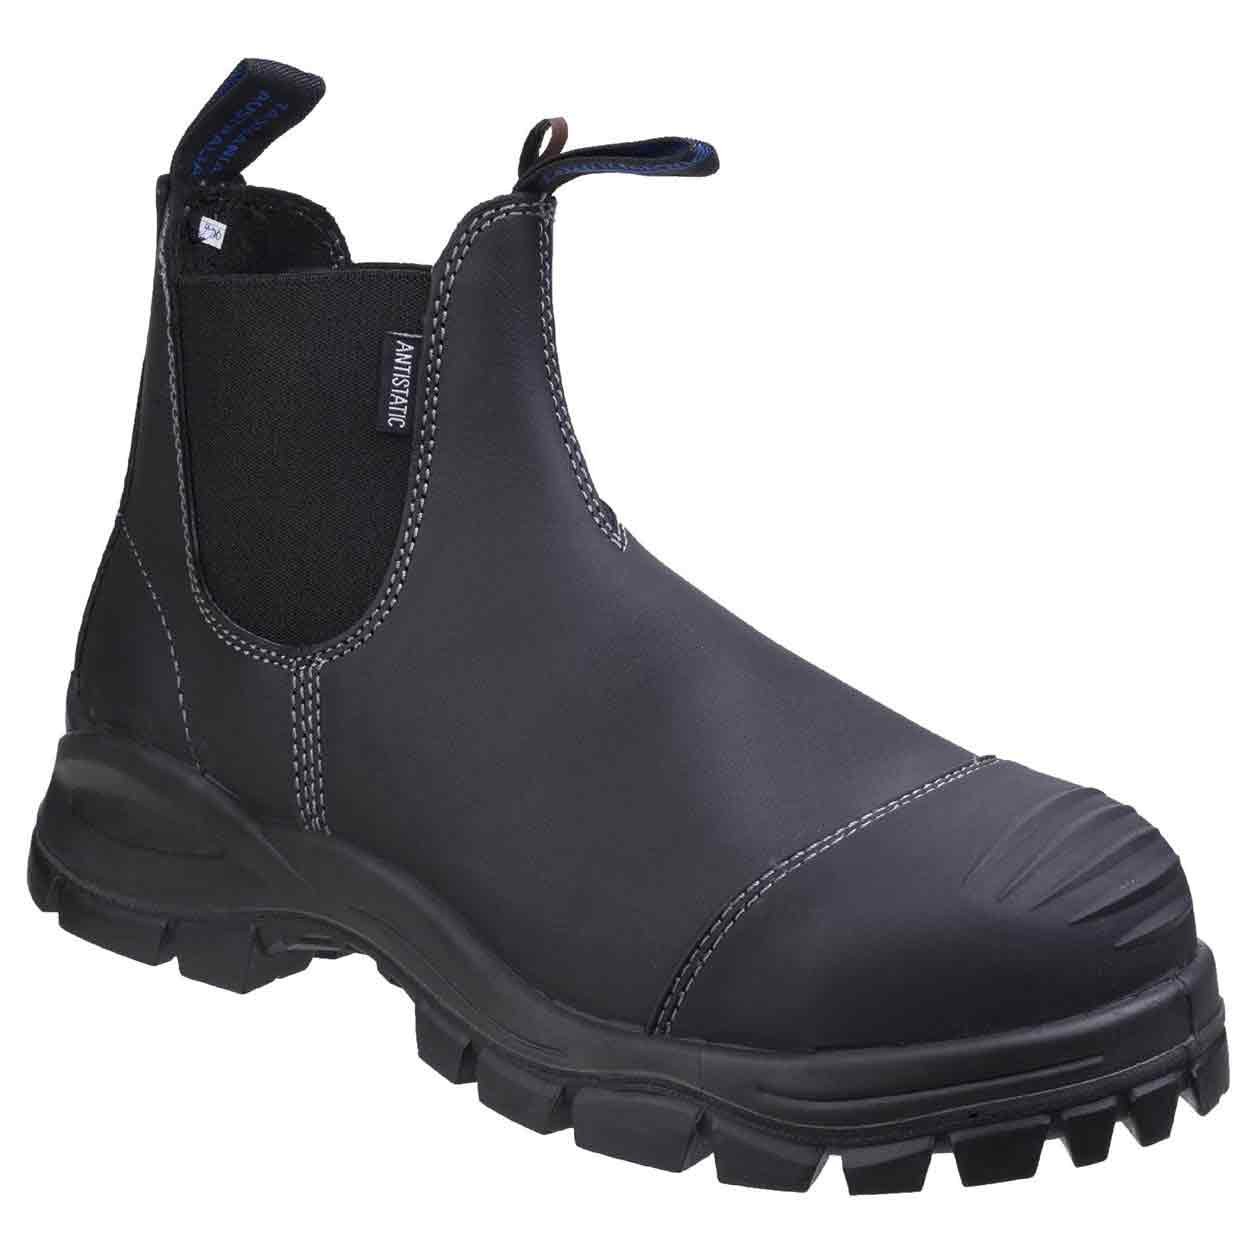 blundstone 138 review